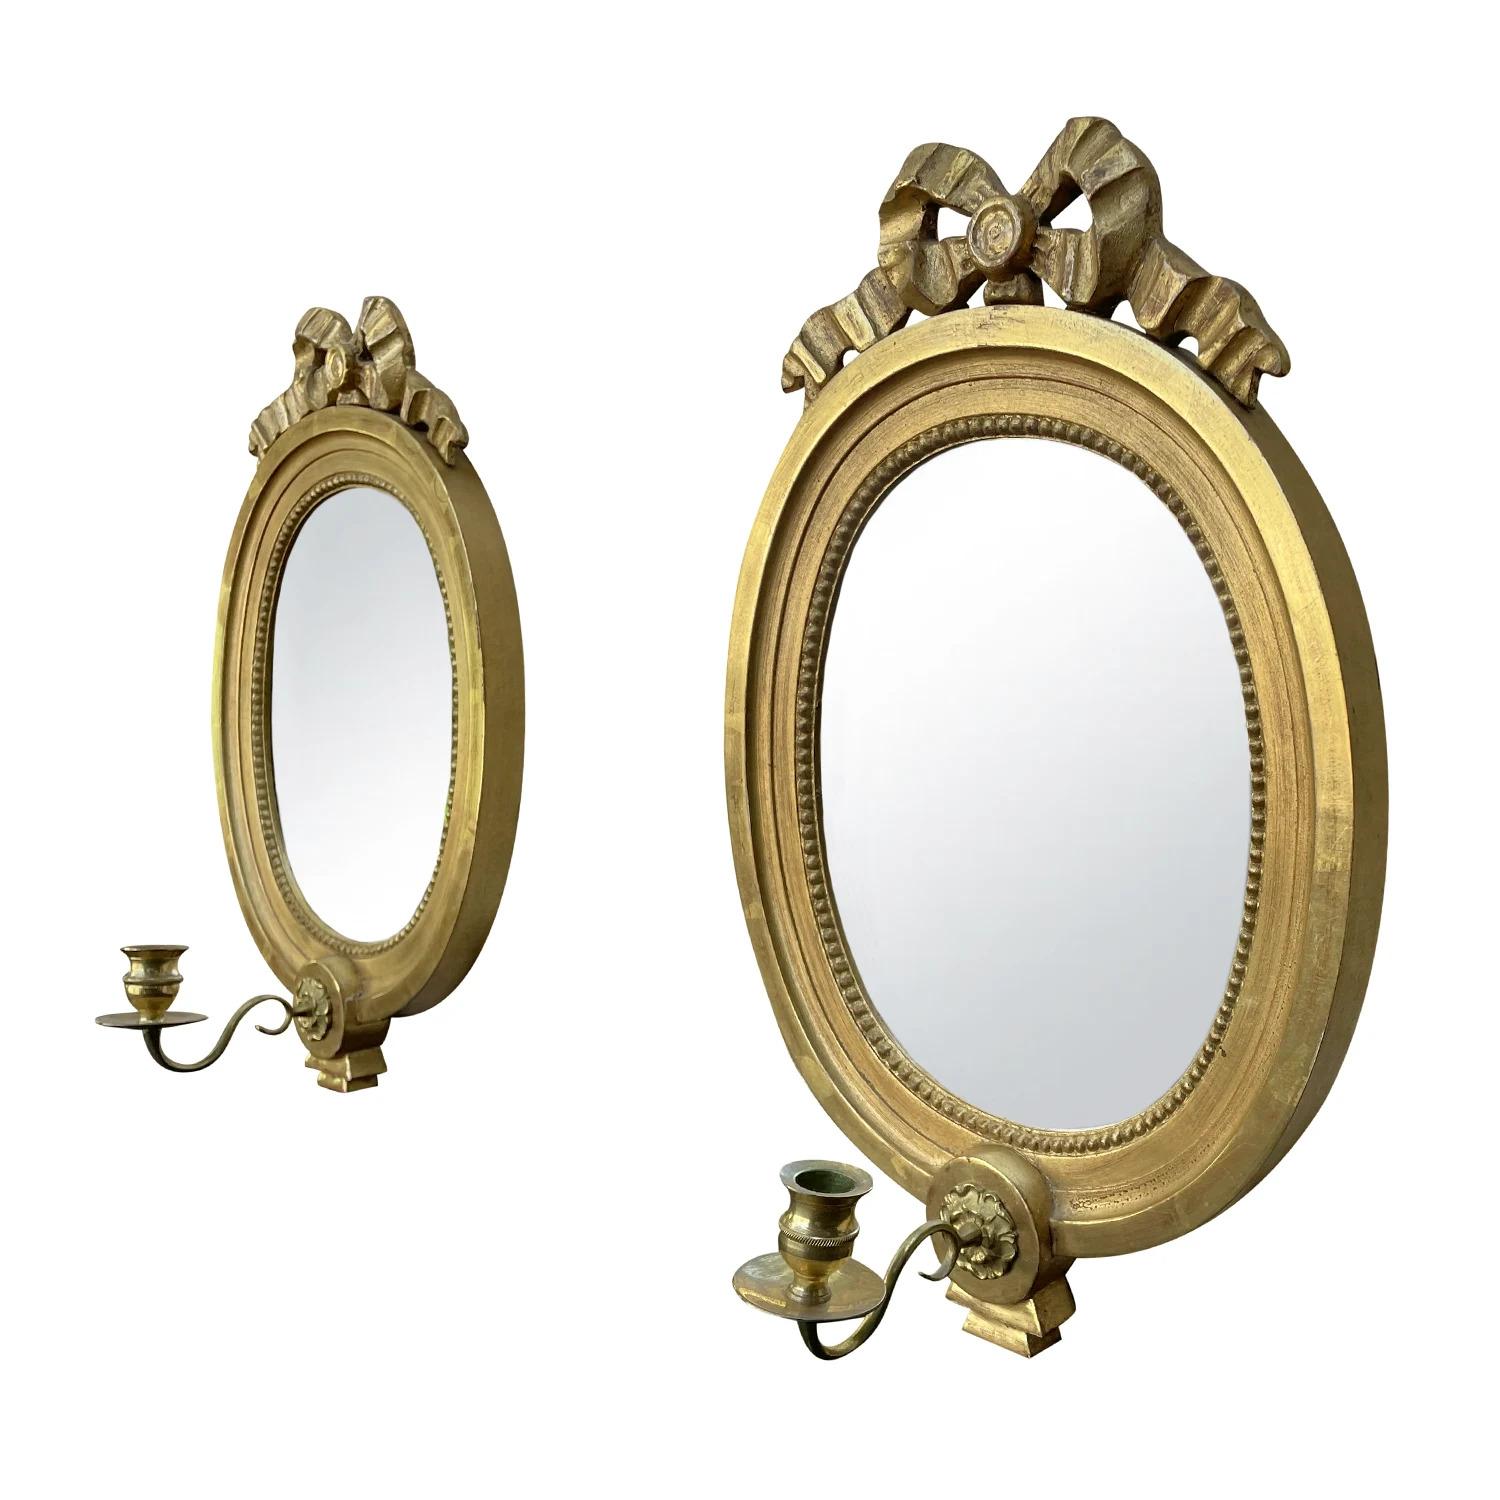 A 19th - 20th Century, gold antique Swedish Gustavian style pair of oval shaped wall mirrors made of hand carved gilded wood, bronze with its original mirrored glass, in good condition. Each of the Scandinavian wall décor piece is composed with a